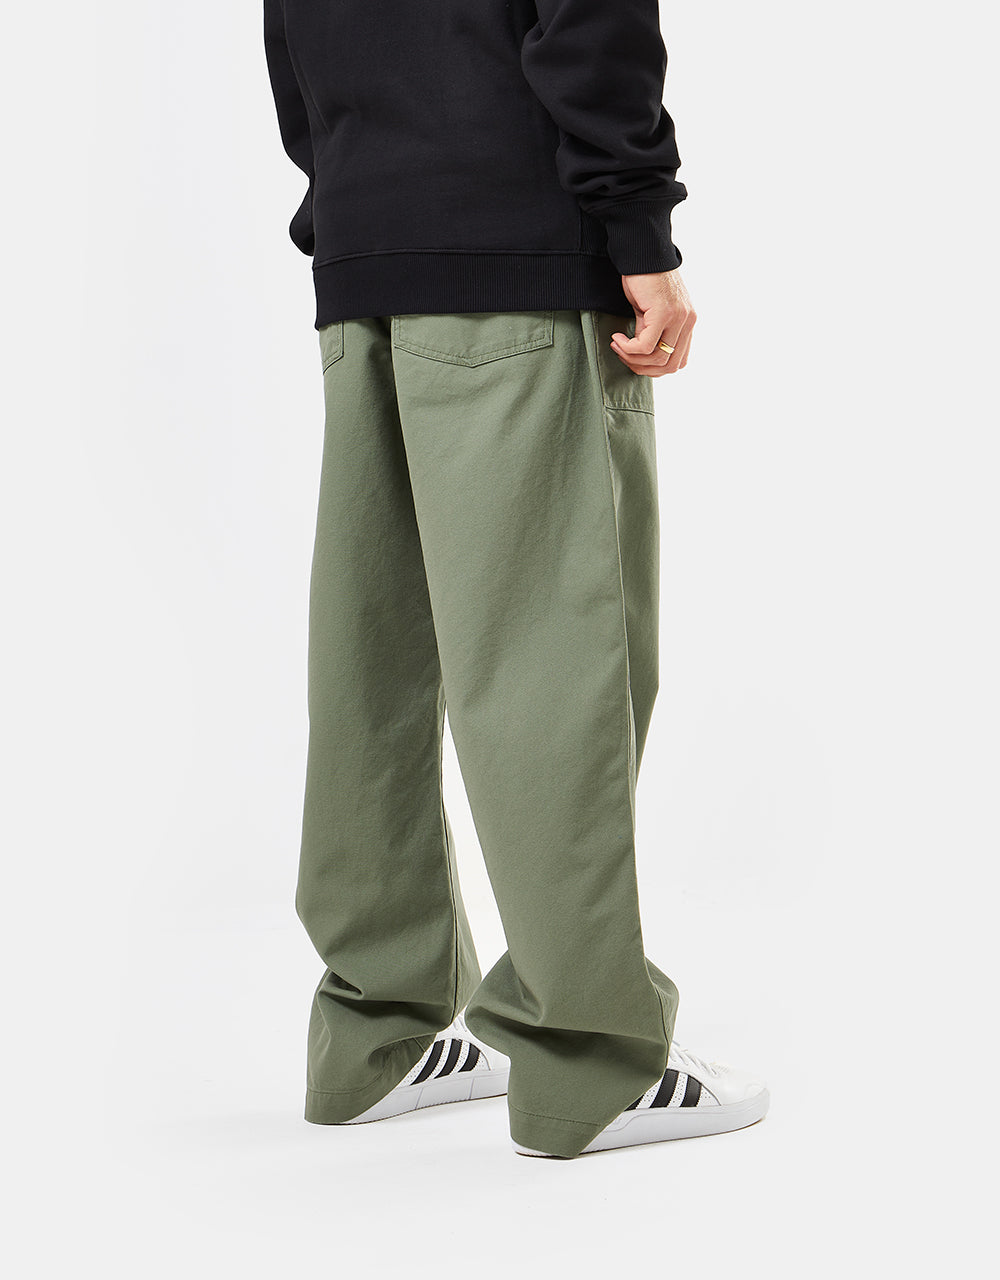 Carhartt WIP Council Pant - Dollar Green (Rinsed) – Route One